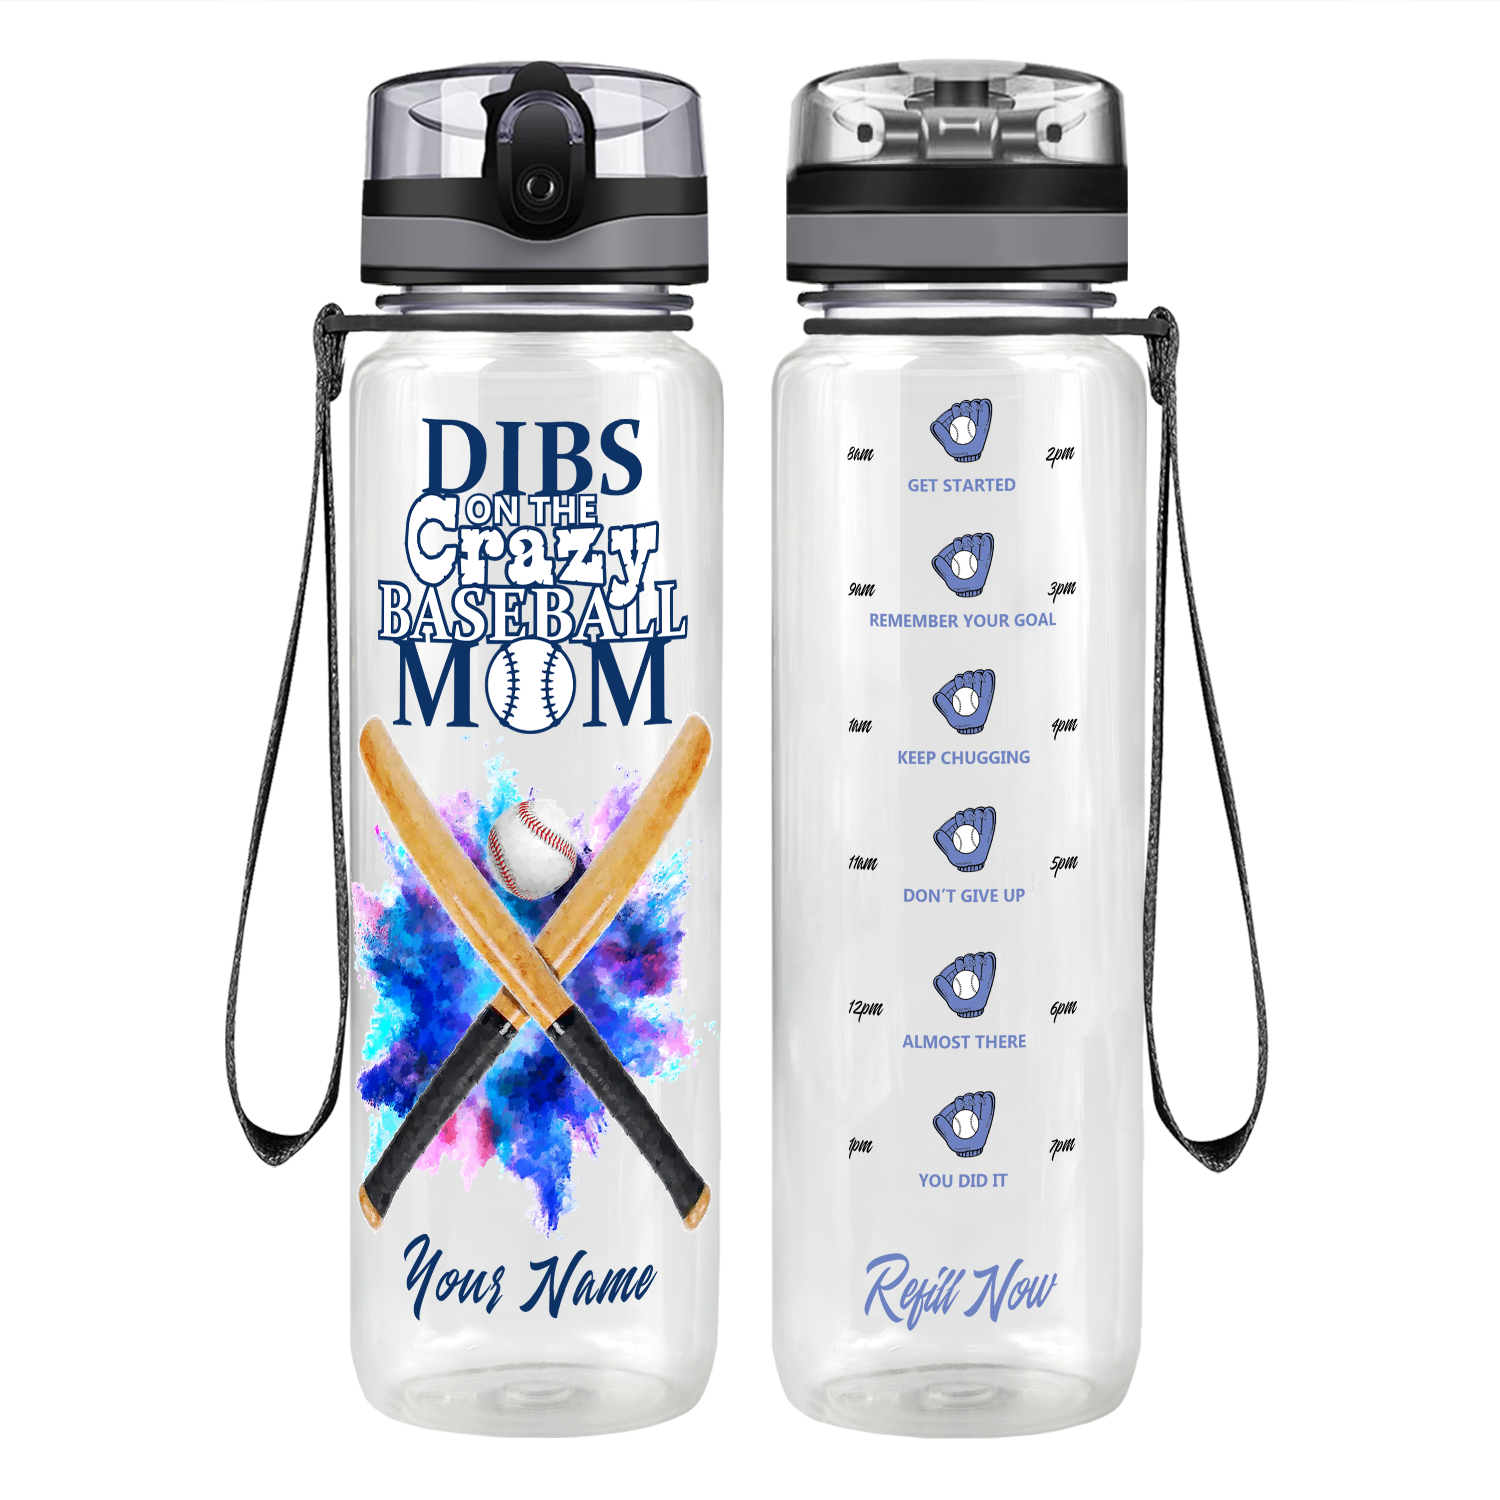 Personalized Dibs on the Baseball Mom on 32 oz Motivational Tracking Water Bottle